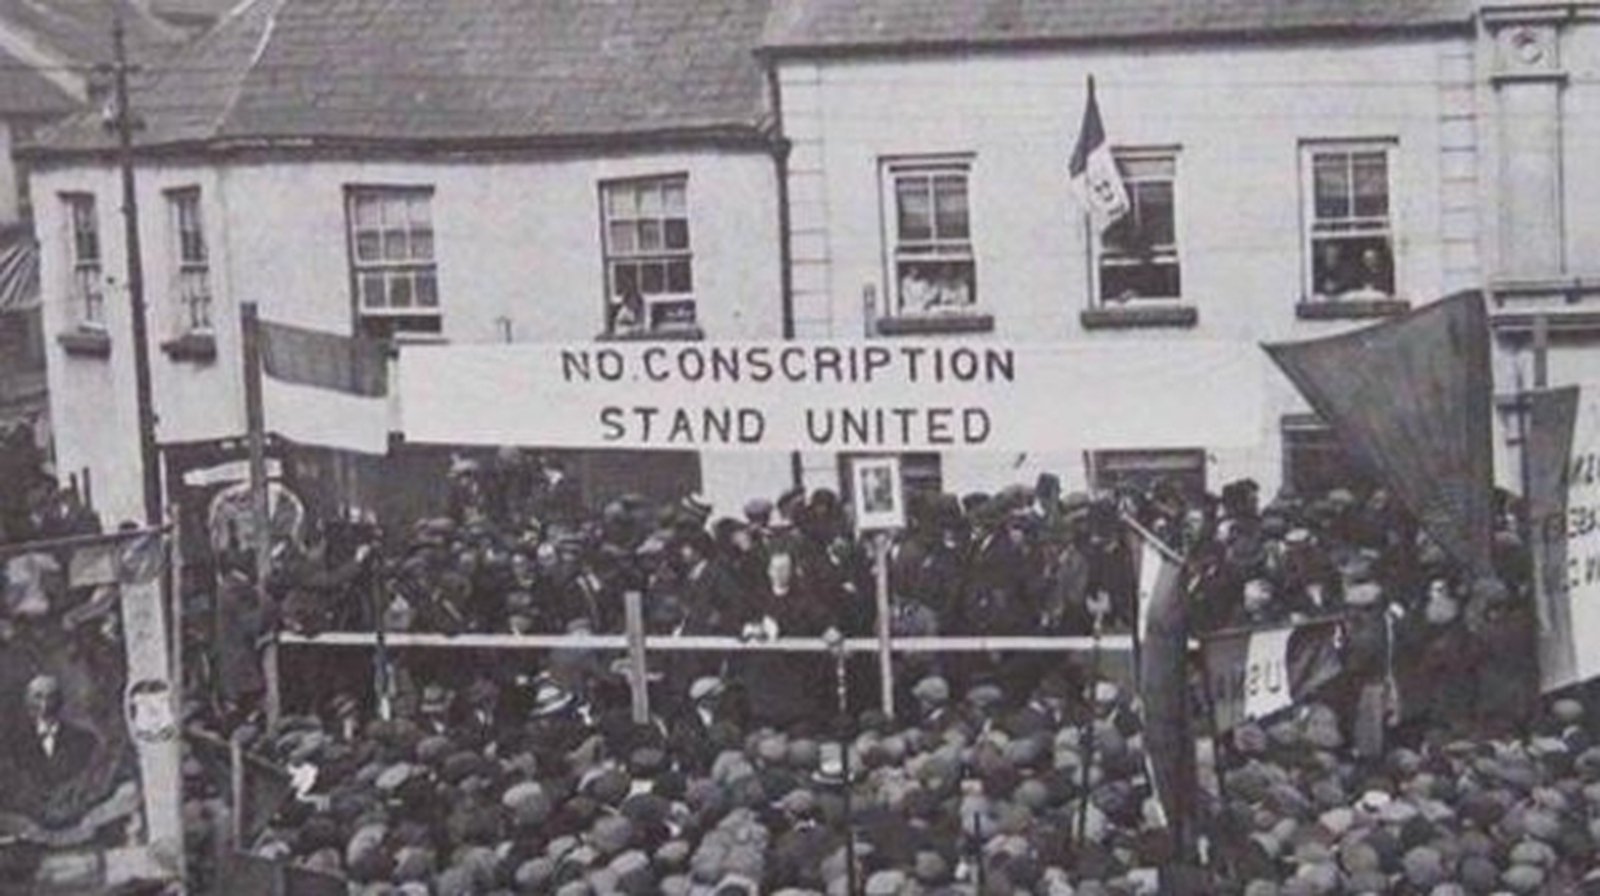 Image - De Valera addresses an anti-conscription meeting in Ballaghaderreen, County Roscommon, May 5 1918.